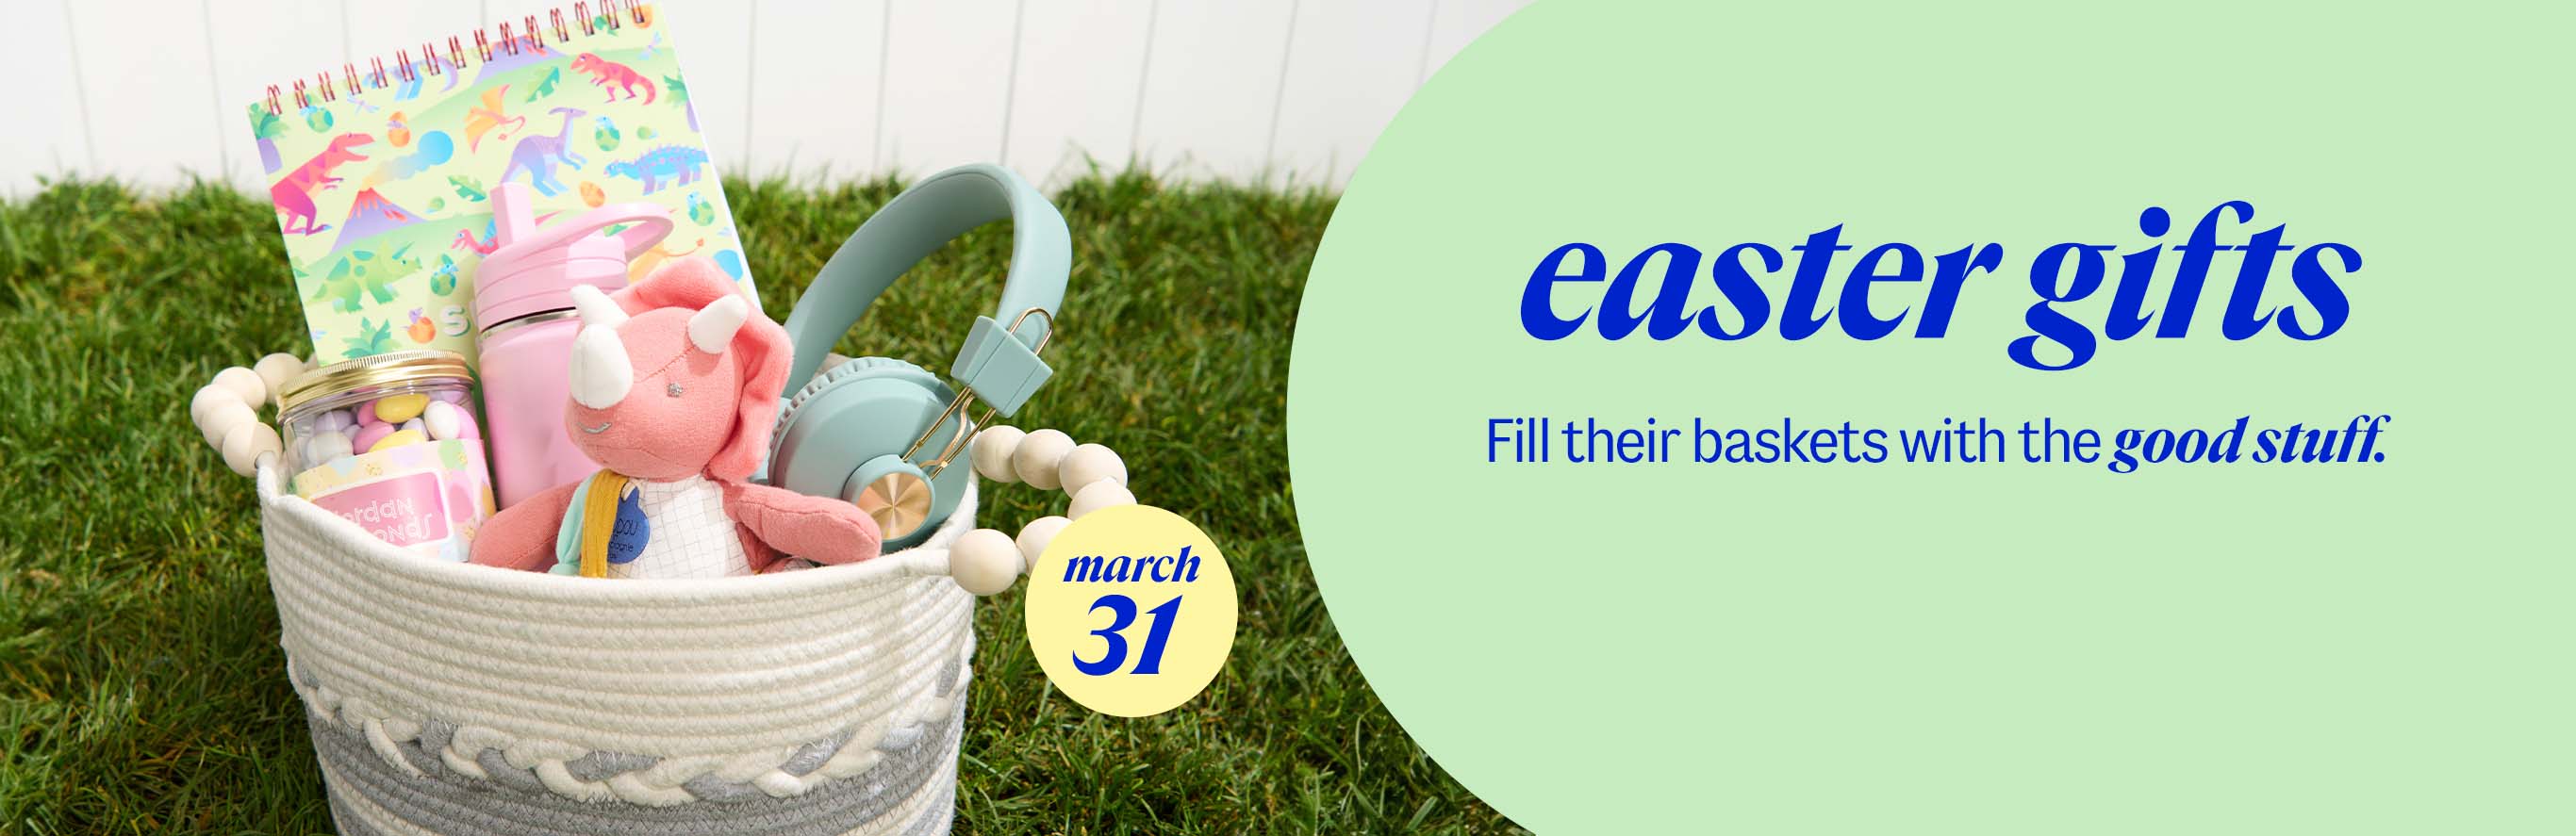 (march 31) easter gitfs. Fill their baskets with the good stuff.